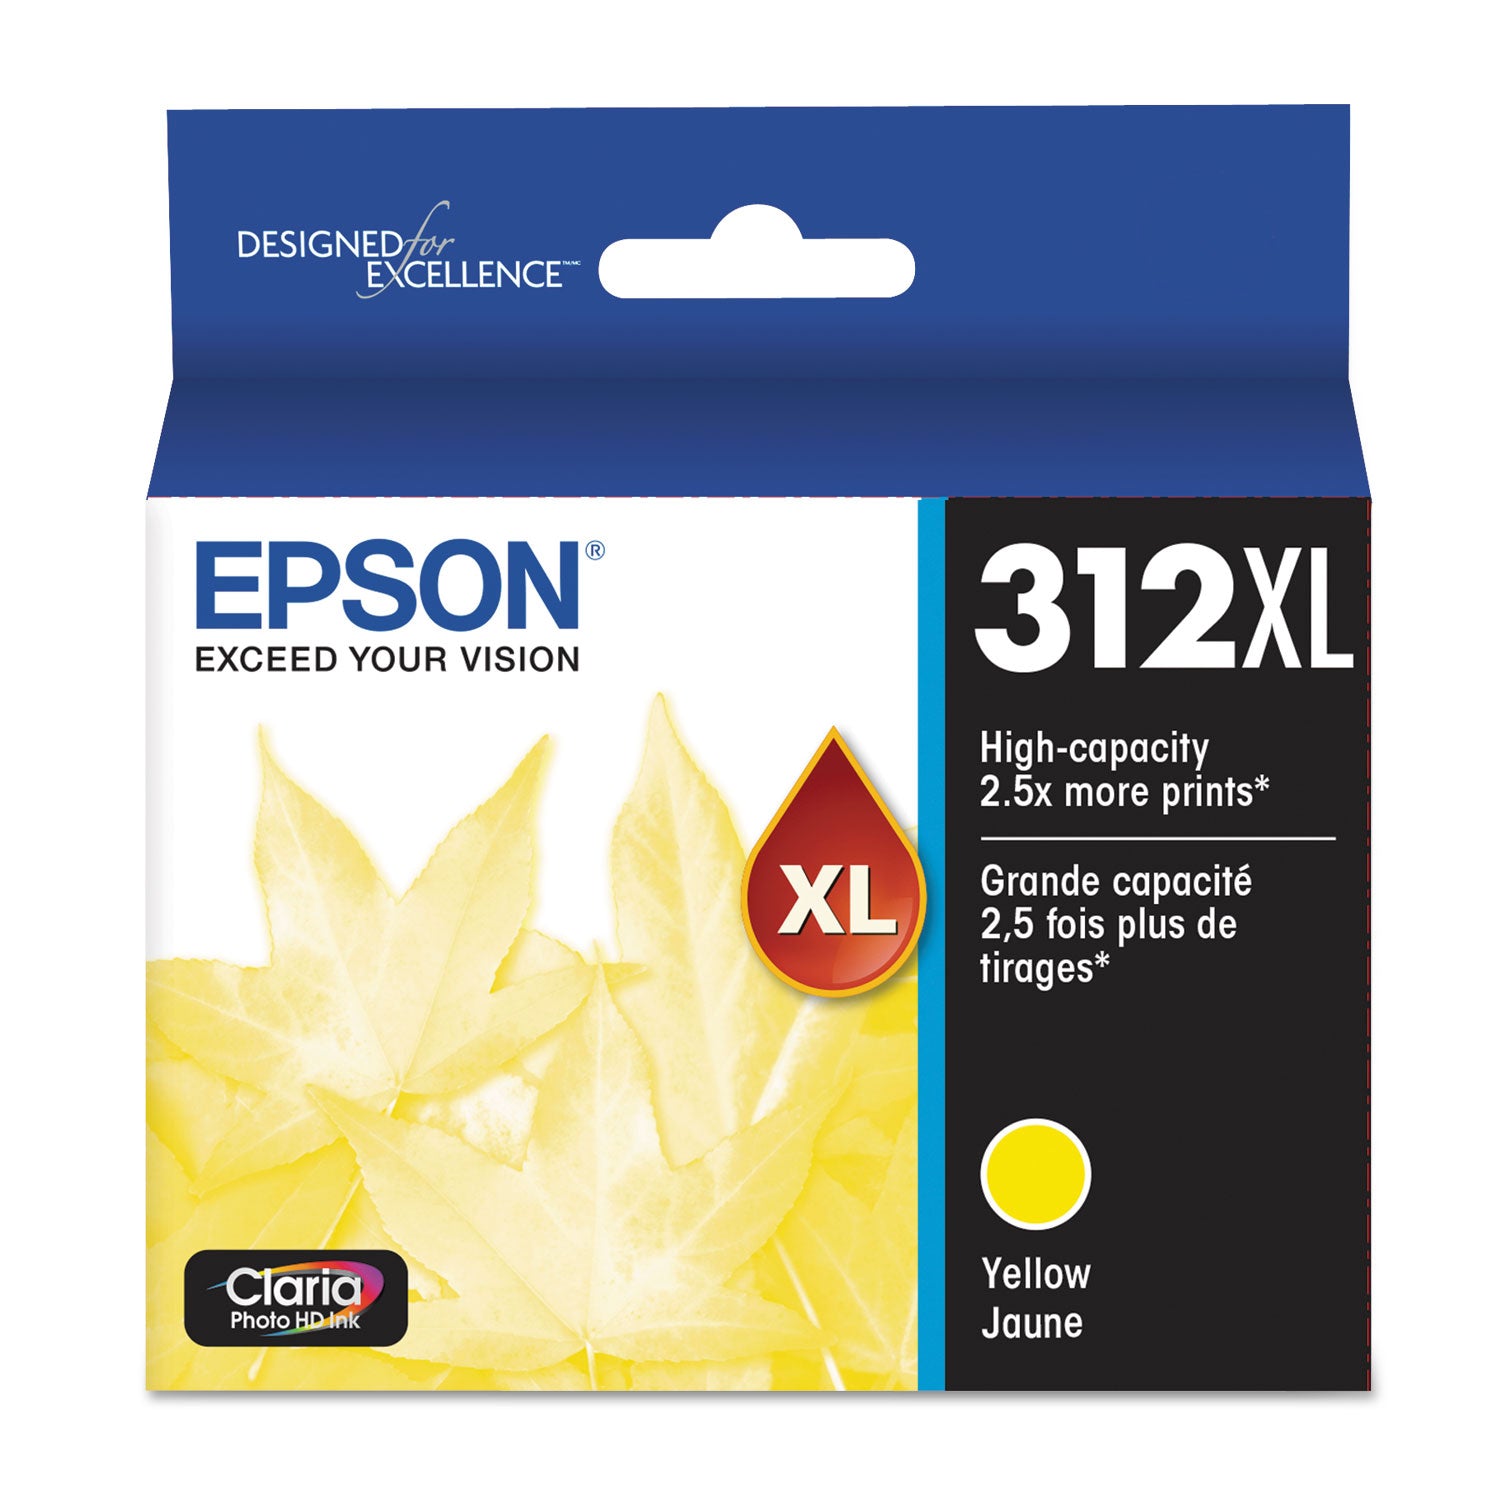 t312xl420-s-312xl-claria-high-yield-ink-830-page-yield-yellow_epst312xl420s - 1